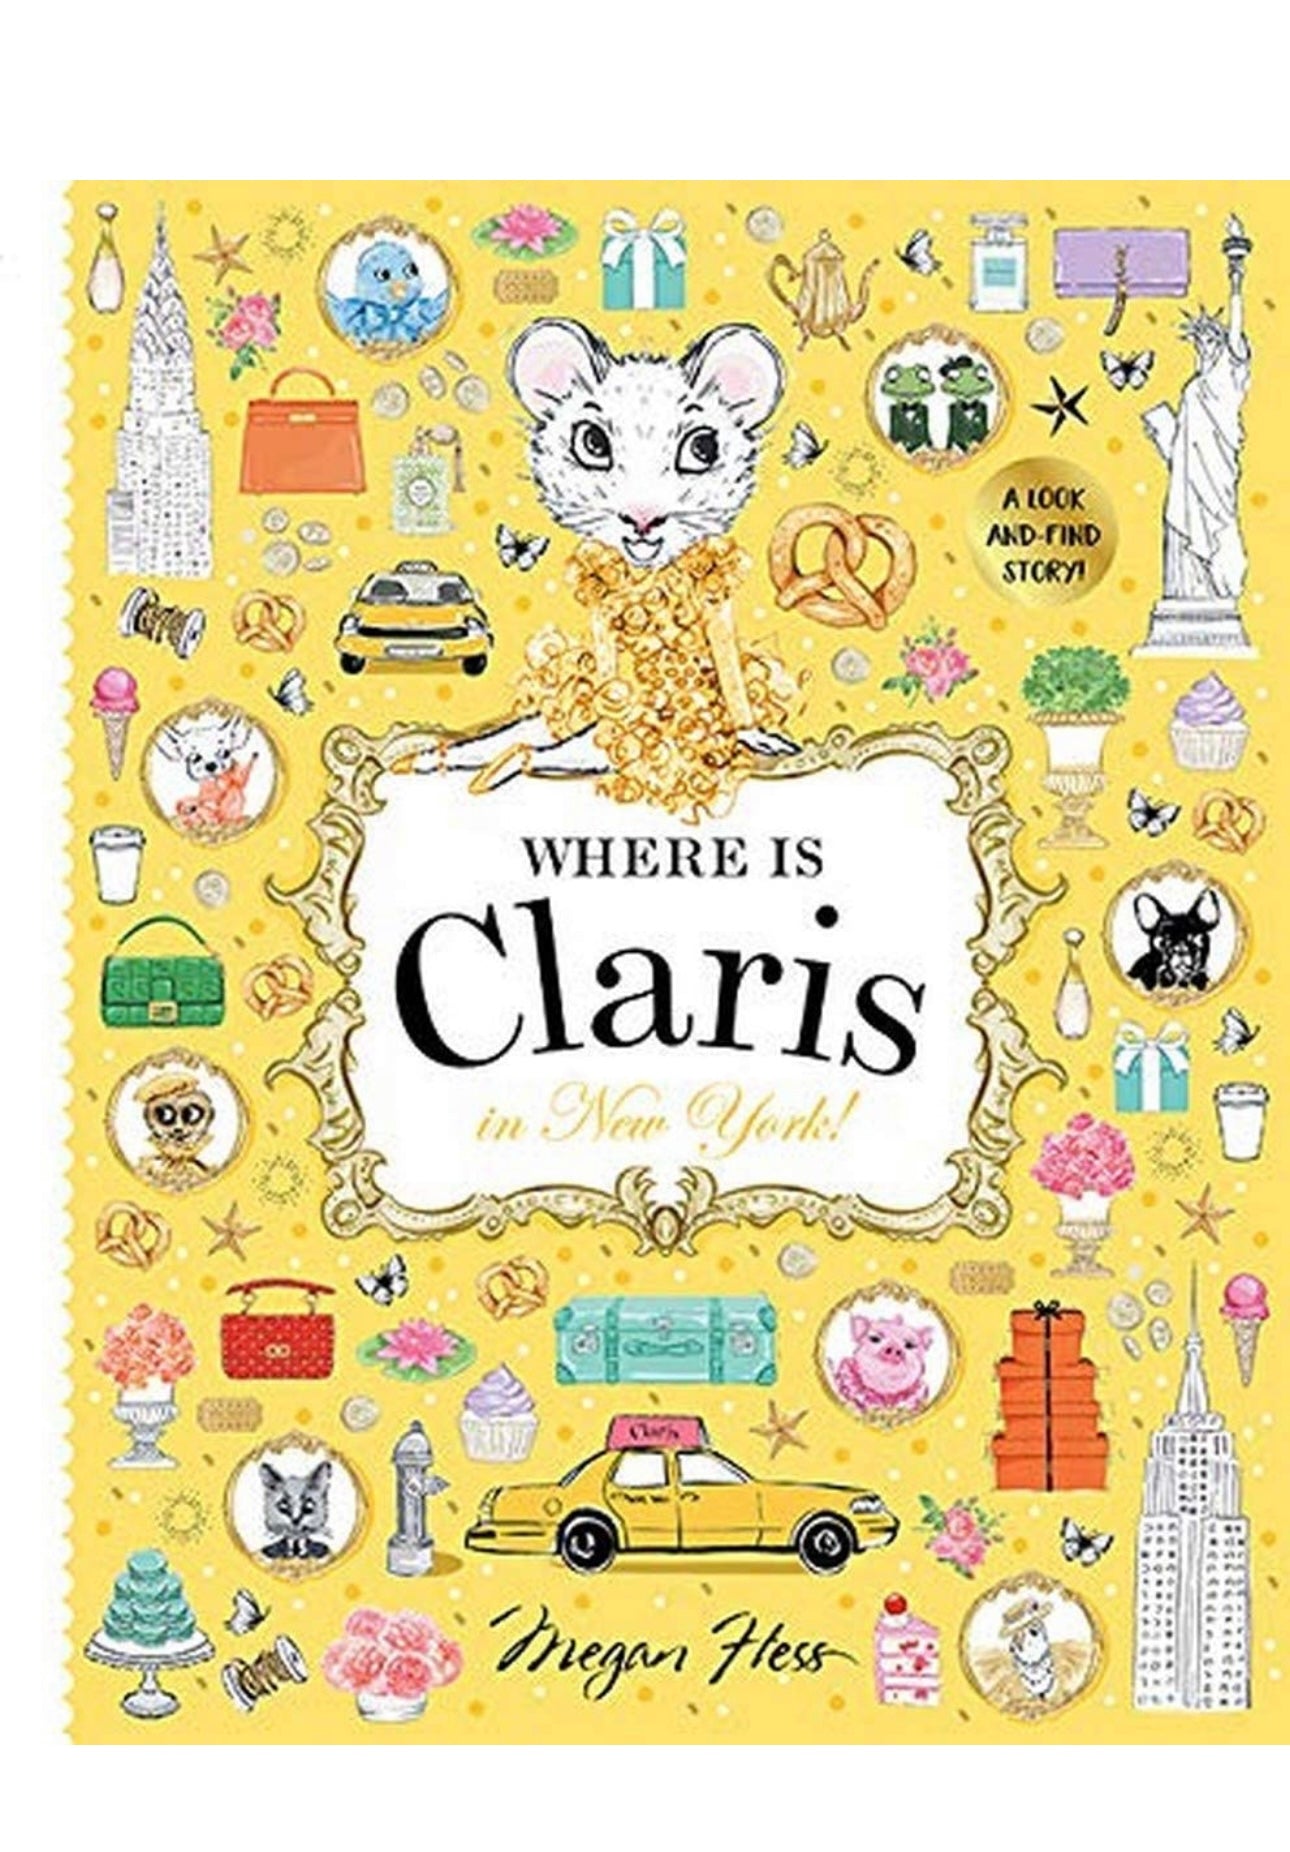 Where is Claris in New York?